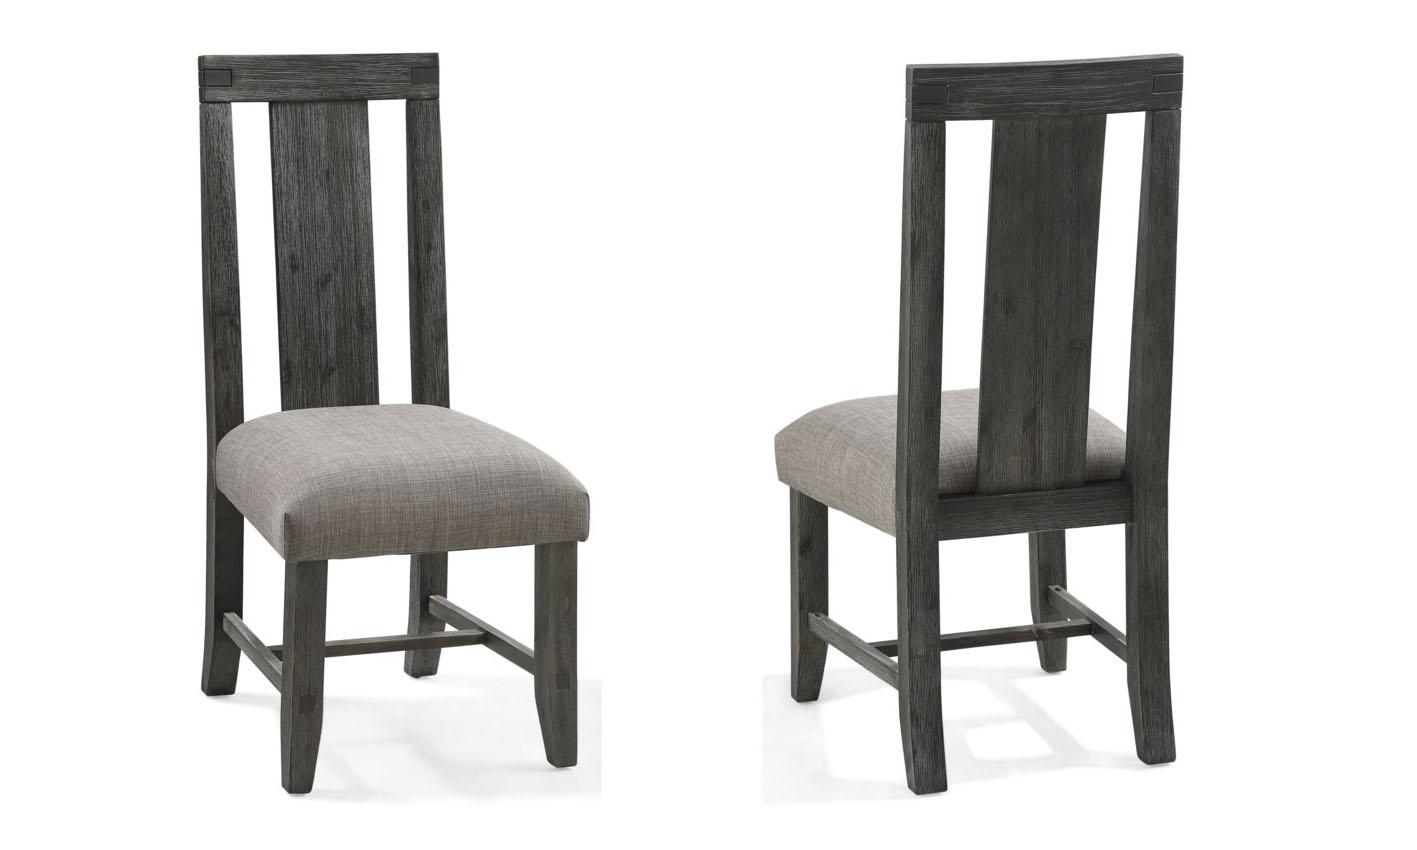 Rustic Dining Chair Set MEADOW 3FT366P-2PC in Graphite Fabric